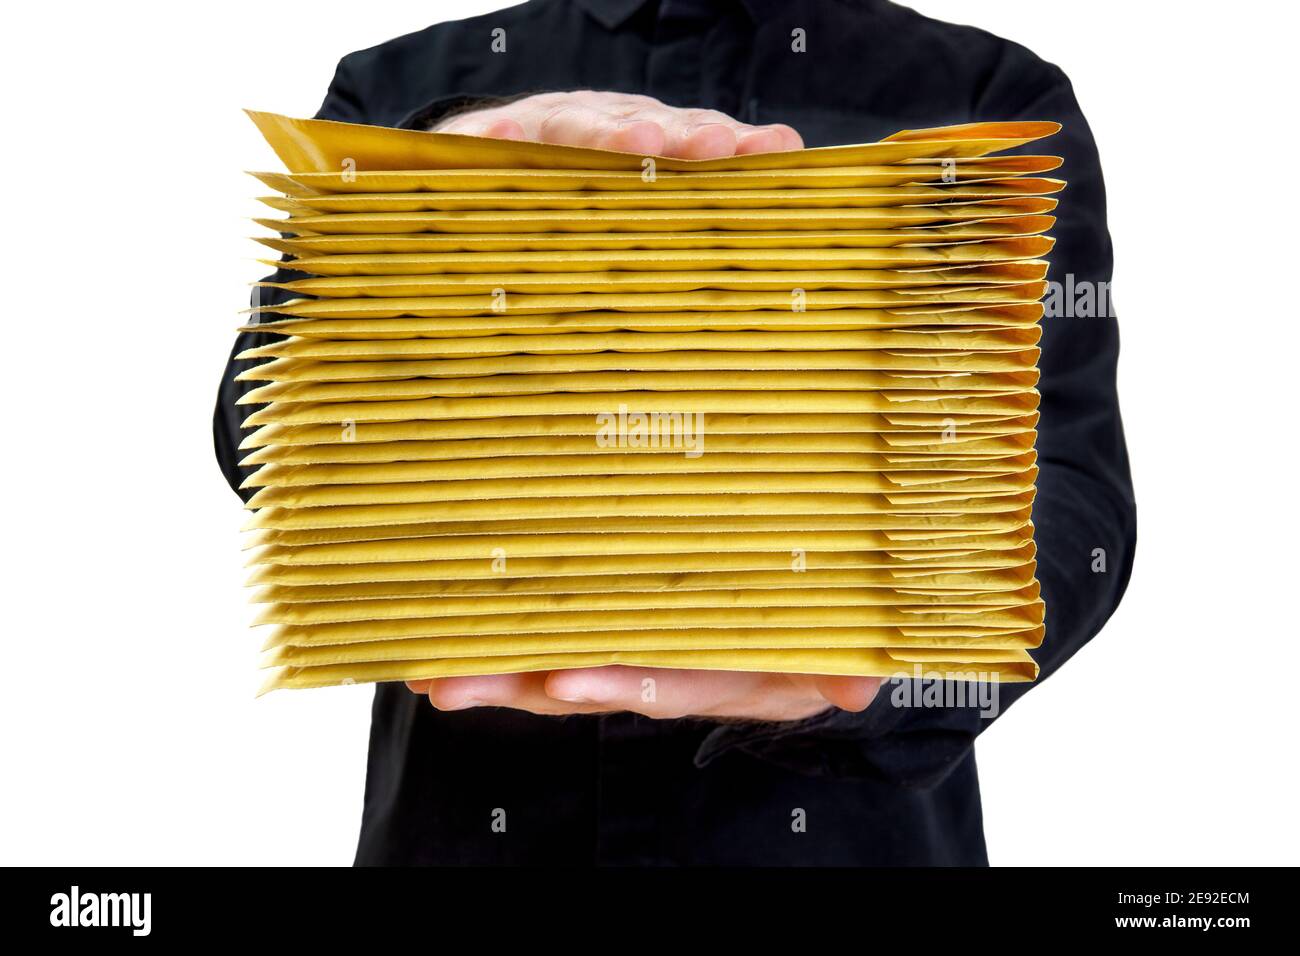 Man wearing a black uniform holding a stack of yellow padded bubble envelopes isolated on white. Stock Photo